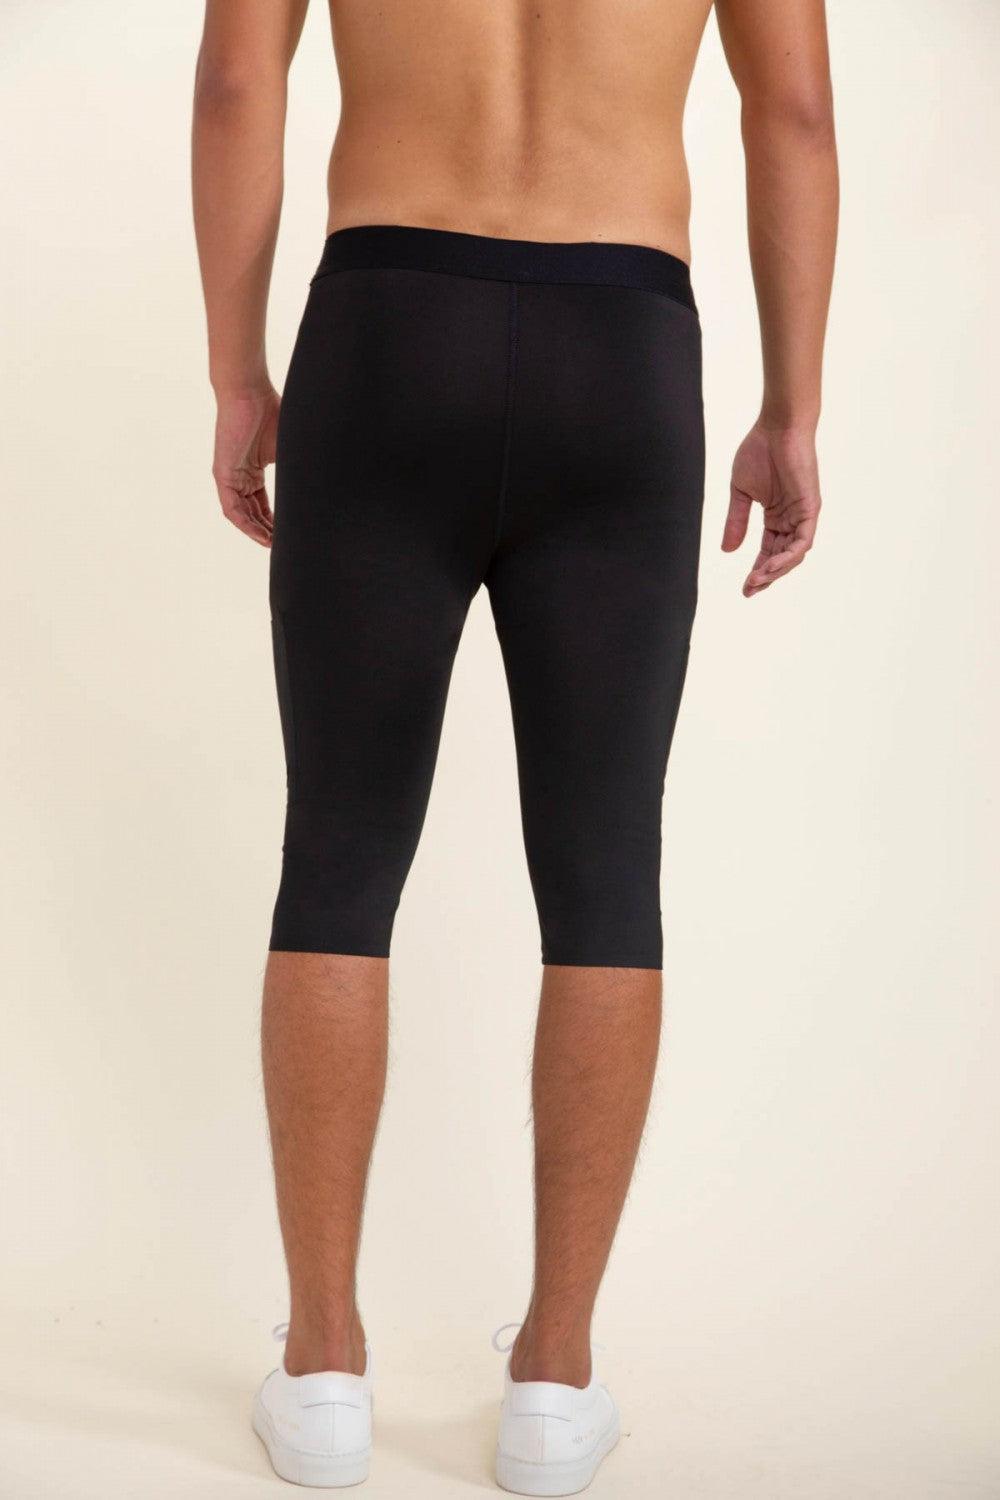 Mens Quick Dry Compression Sports Suit Set Long Johns, Long Leggings,  Compression T Shirt, And Sleeve Legging From Covde, $12.04